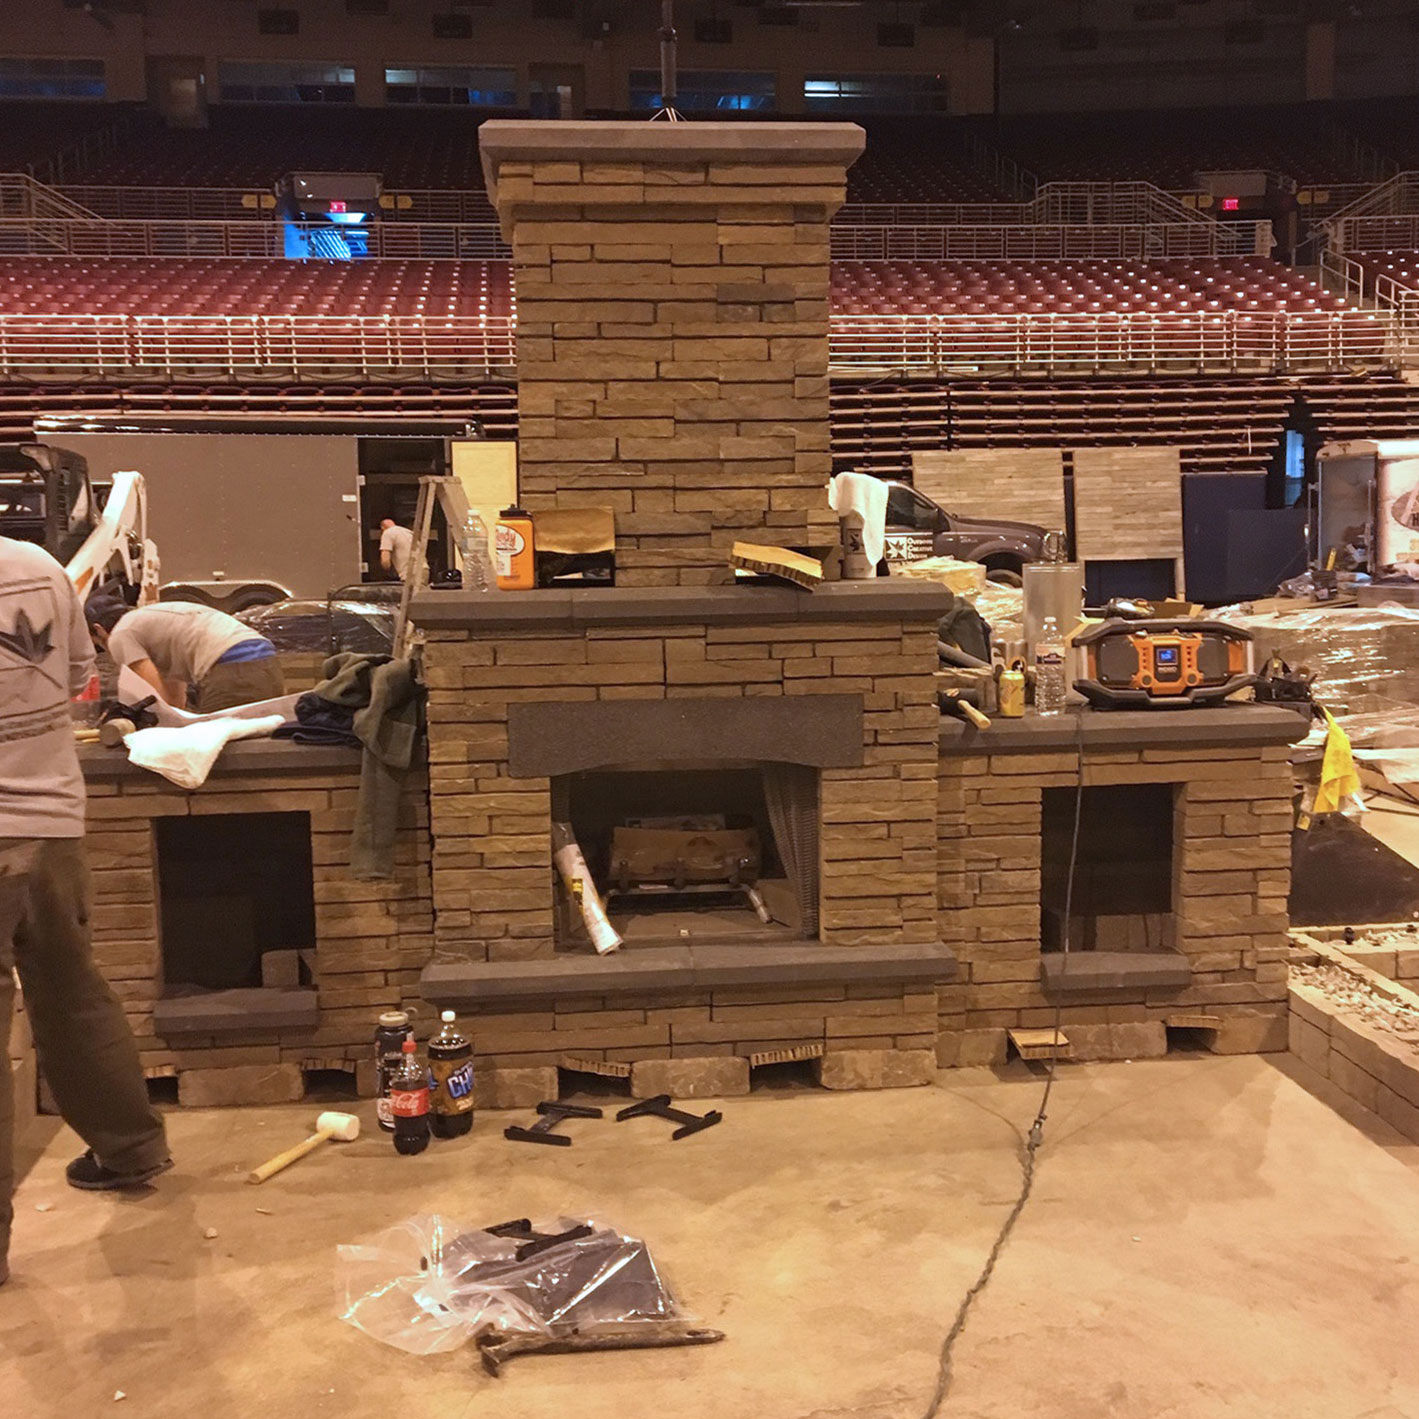 Outdoor Creative Design at the St. Louis Home Show